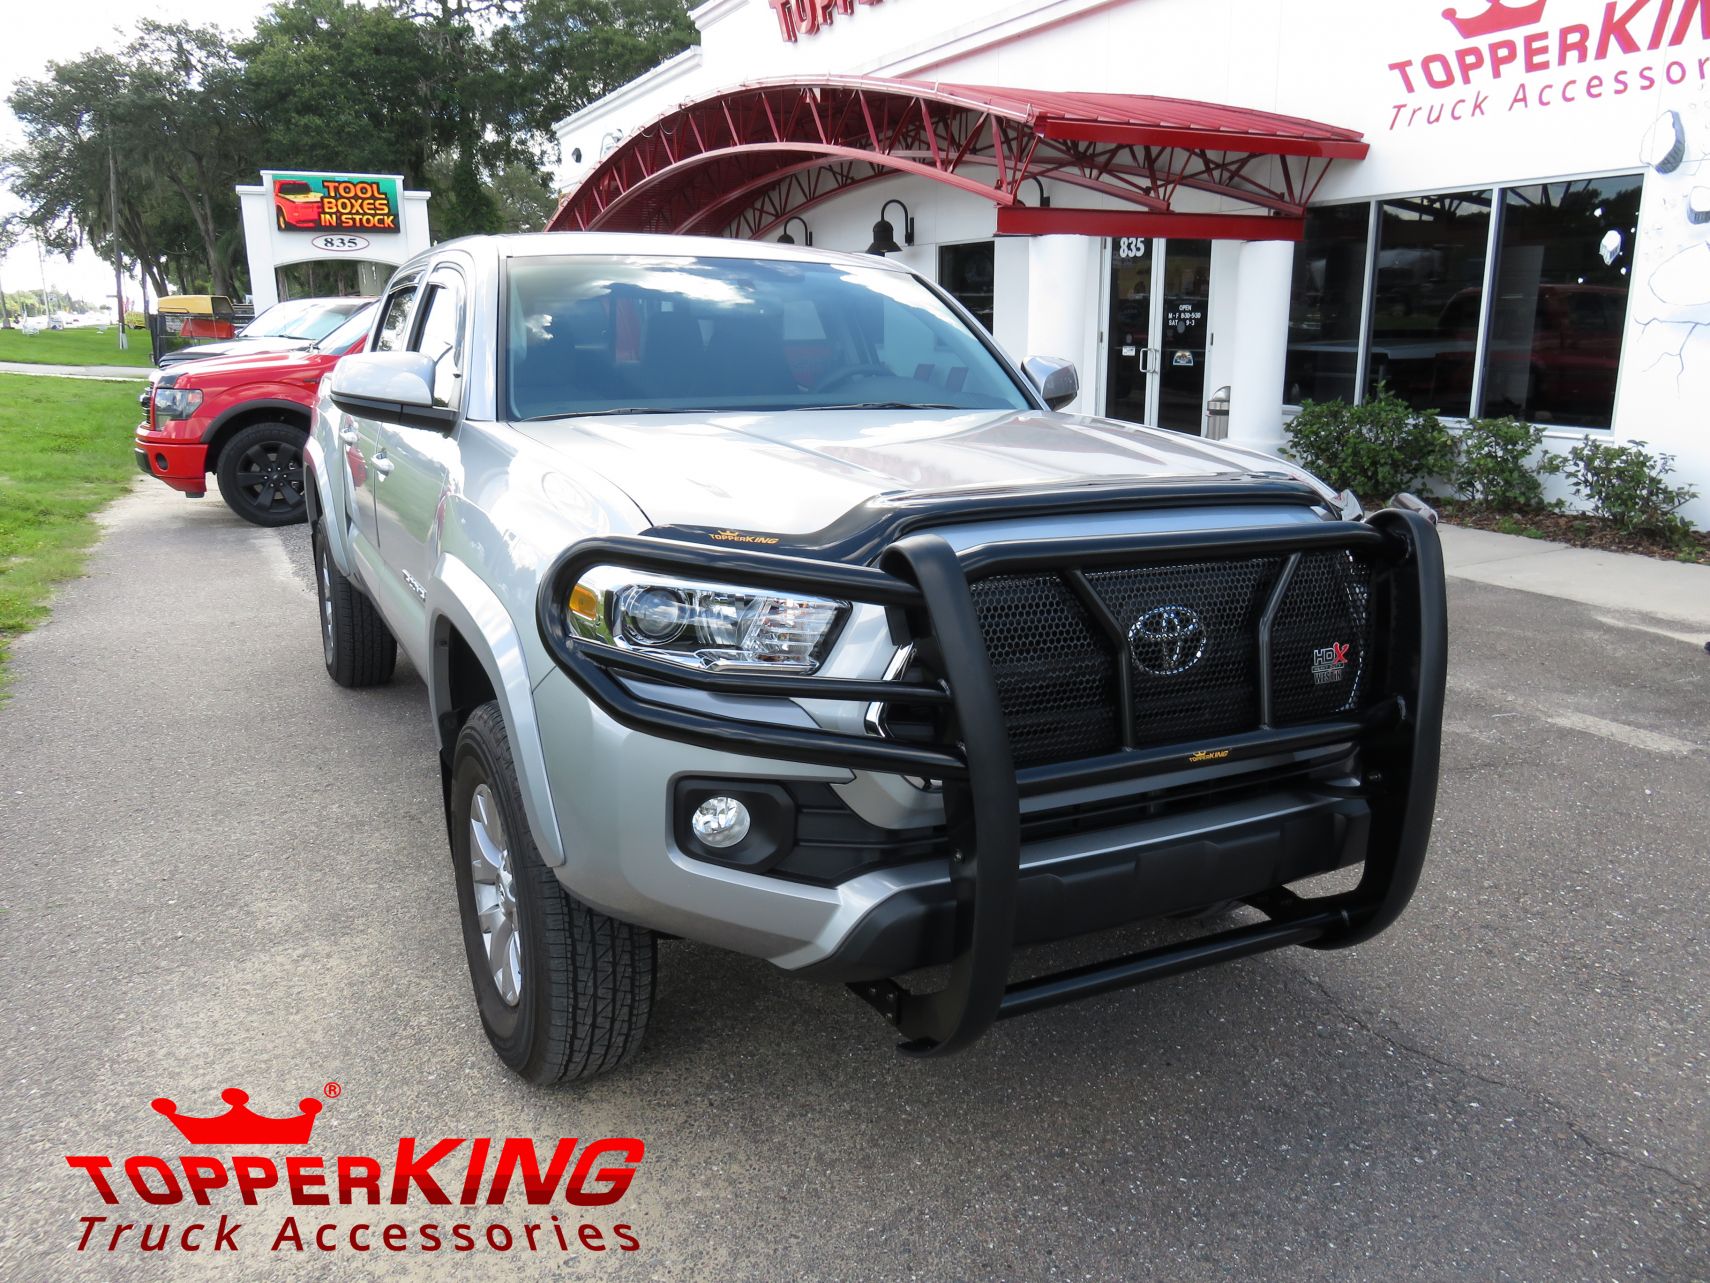 Toyota Tacoma Grill Guard And Hitch Topperking Topperking